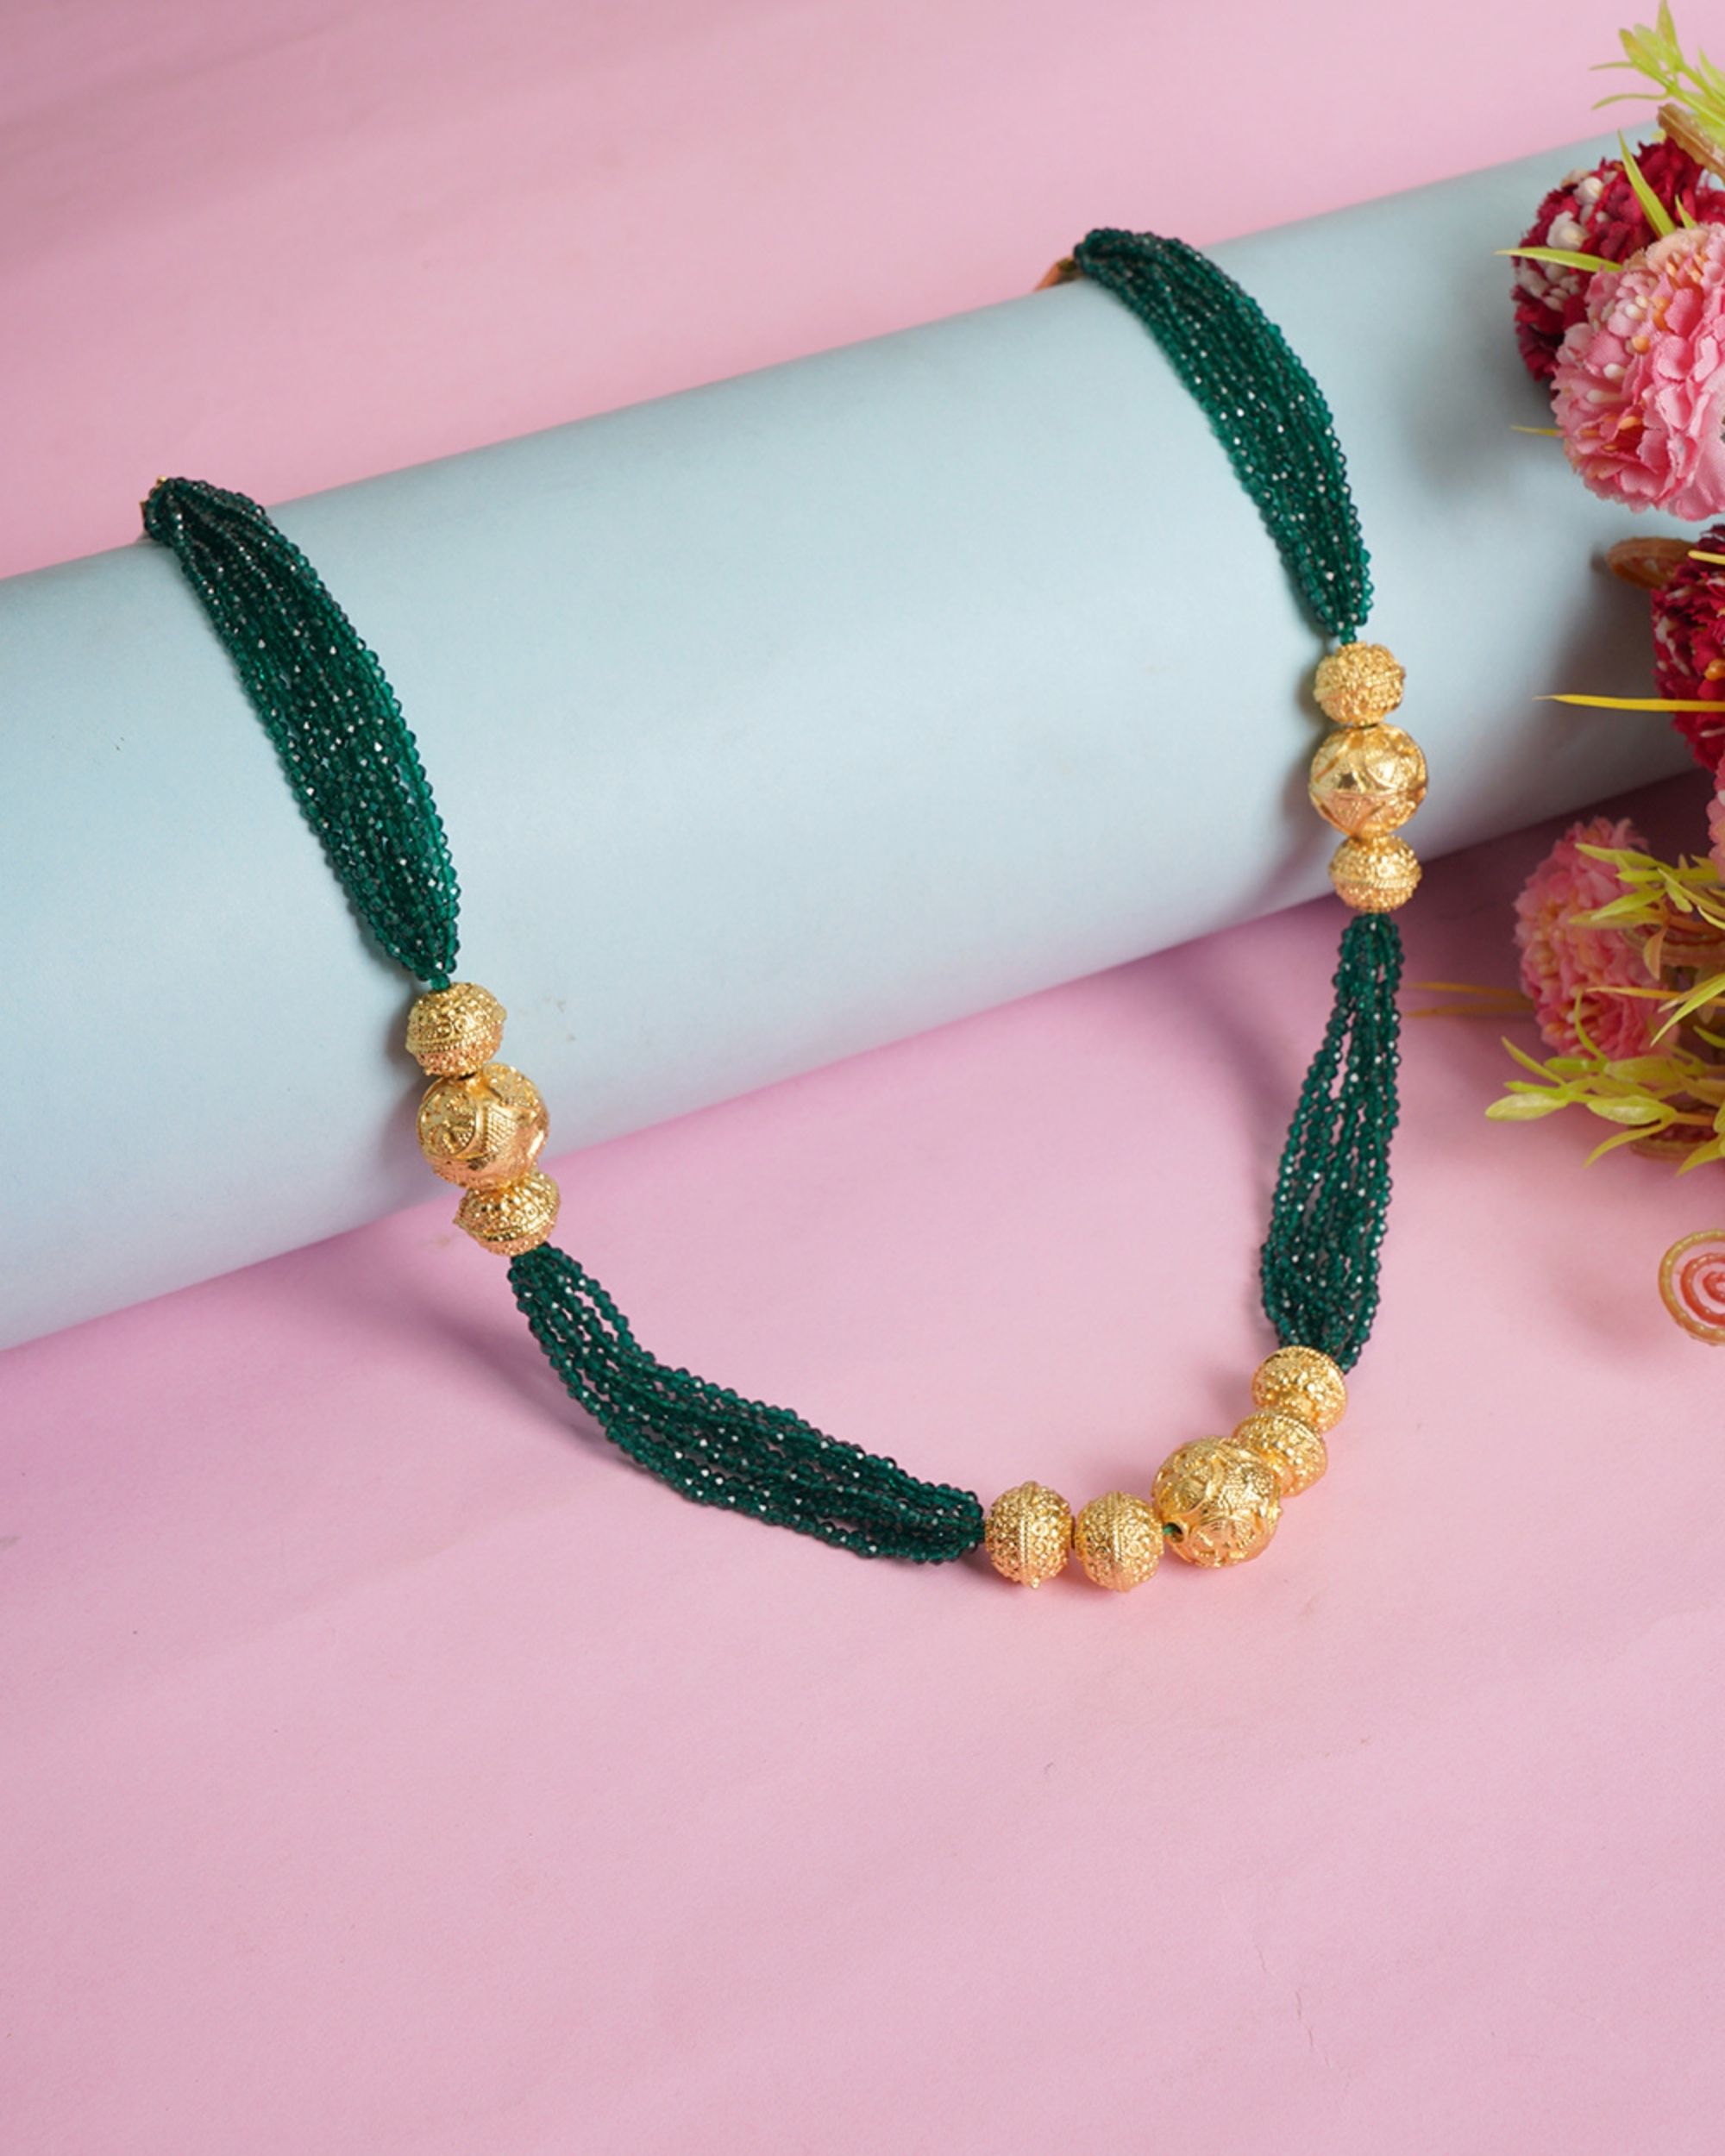 Green beaded handcrafted necklace